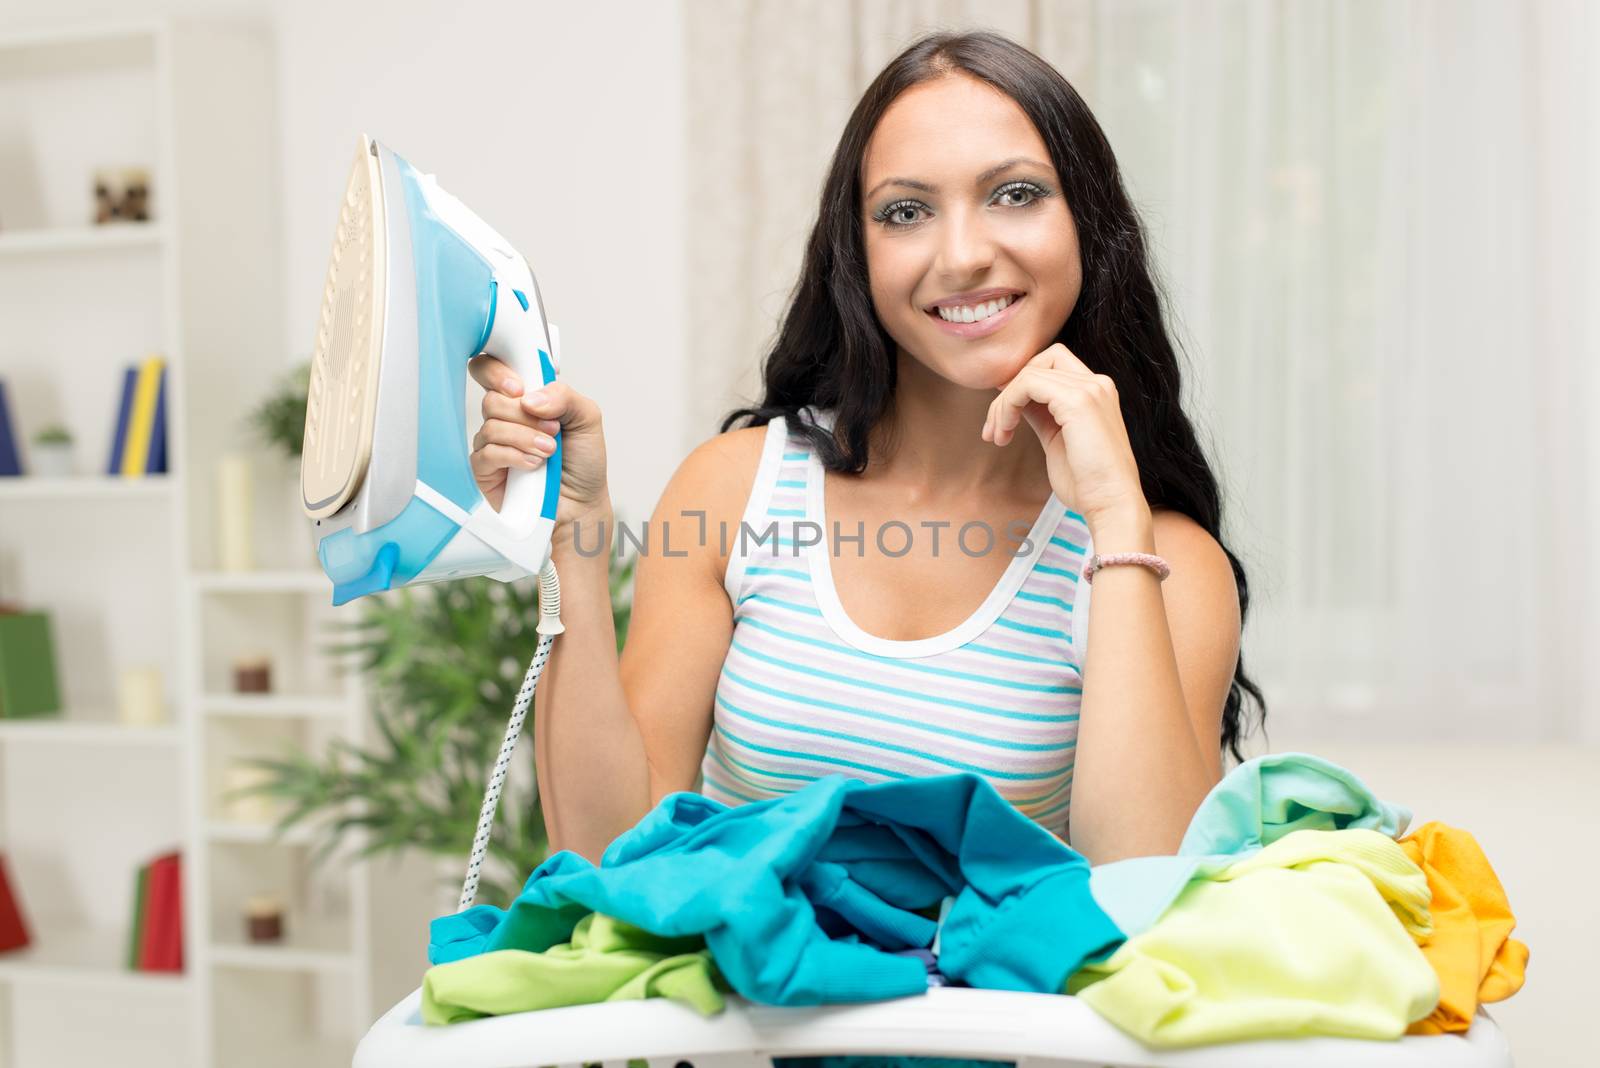 Young beautiful woman with basket laundry for ironing. Looking at camera and holding iron.